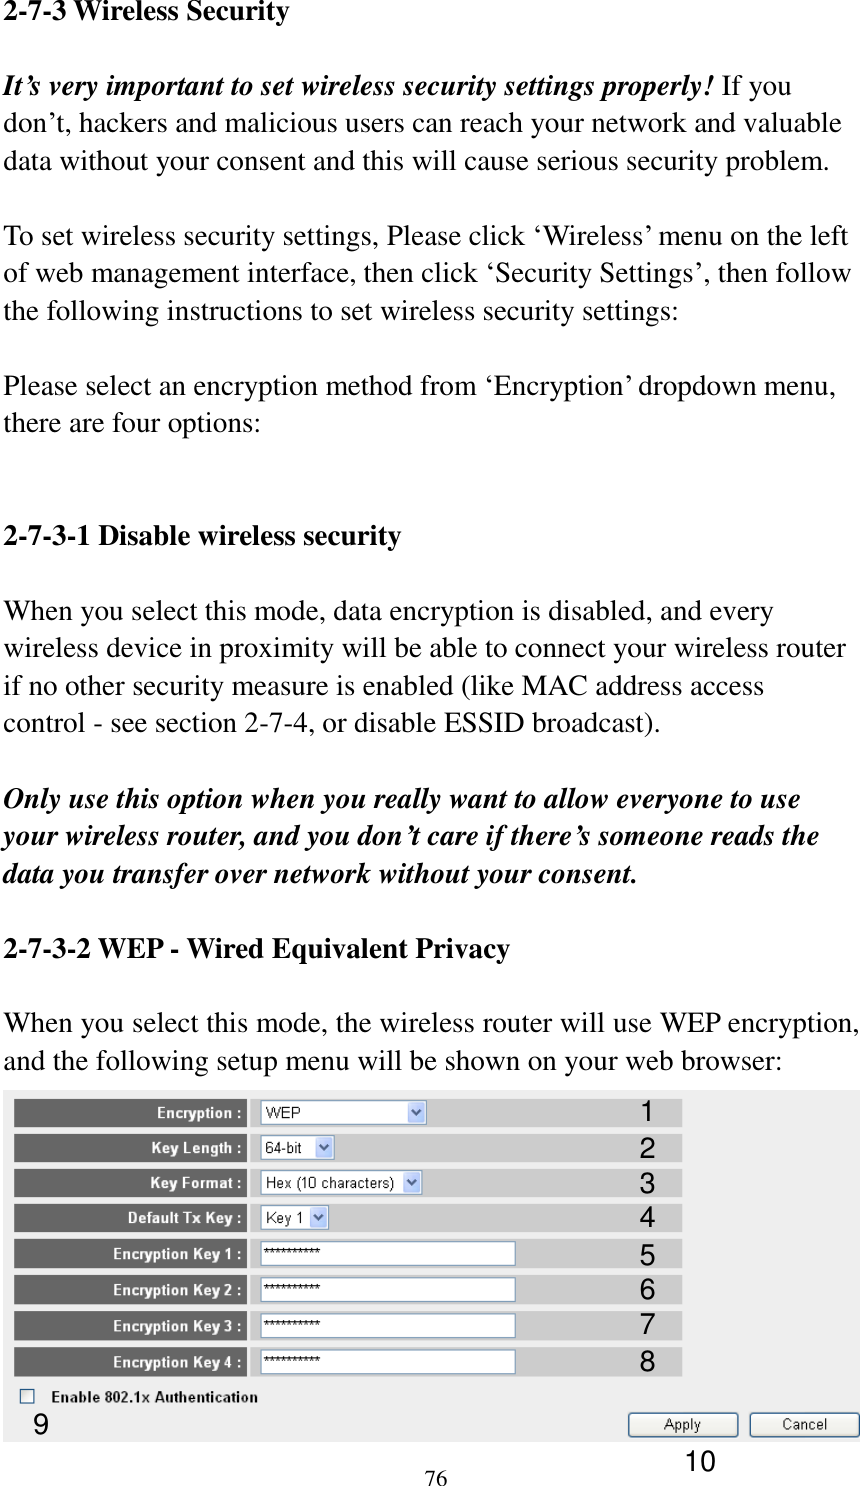 76 2-7-3 Wireless Security  It’s very important to set wireless security settings properly! If you don‟t, hackers and malicious users can reach your network and valuable data without your consent and this will cause serious security problem.  To set wireless security settings, Please click „Wireless‟ menu on the left of web management interface, then click „Security Settings‟, then follow the following instructions to set wireless security settings:  Please select an encryption method from „Encryption‟ dropdown menu, there are four options:   2-7-3-1 Disable wireless security  When you select this mode, data encryption is disabled, and every wireless device in proximity will be able to connect your wireless router if no other security measure is enabled (like MAC address access control - see section 2-7-4, or disable ESSID broadcast).    Only use this option when you really want to allow everyone to use your wireless router, and you don’t care if there’s someone reads the data you transfer over network without your consent.  2-7-3-2 WEP - Wired Equivalent Privacy  When you select this mode, the wireless router will use WEP encryption, and the following setup menu will be shown on your web browser:  1 2 3 5 7 6 9 4 8 10 